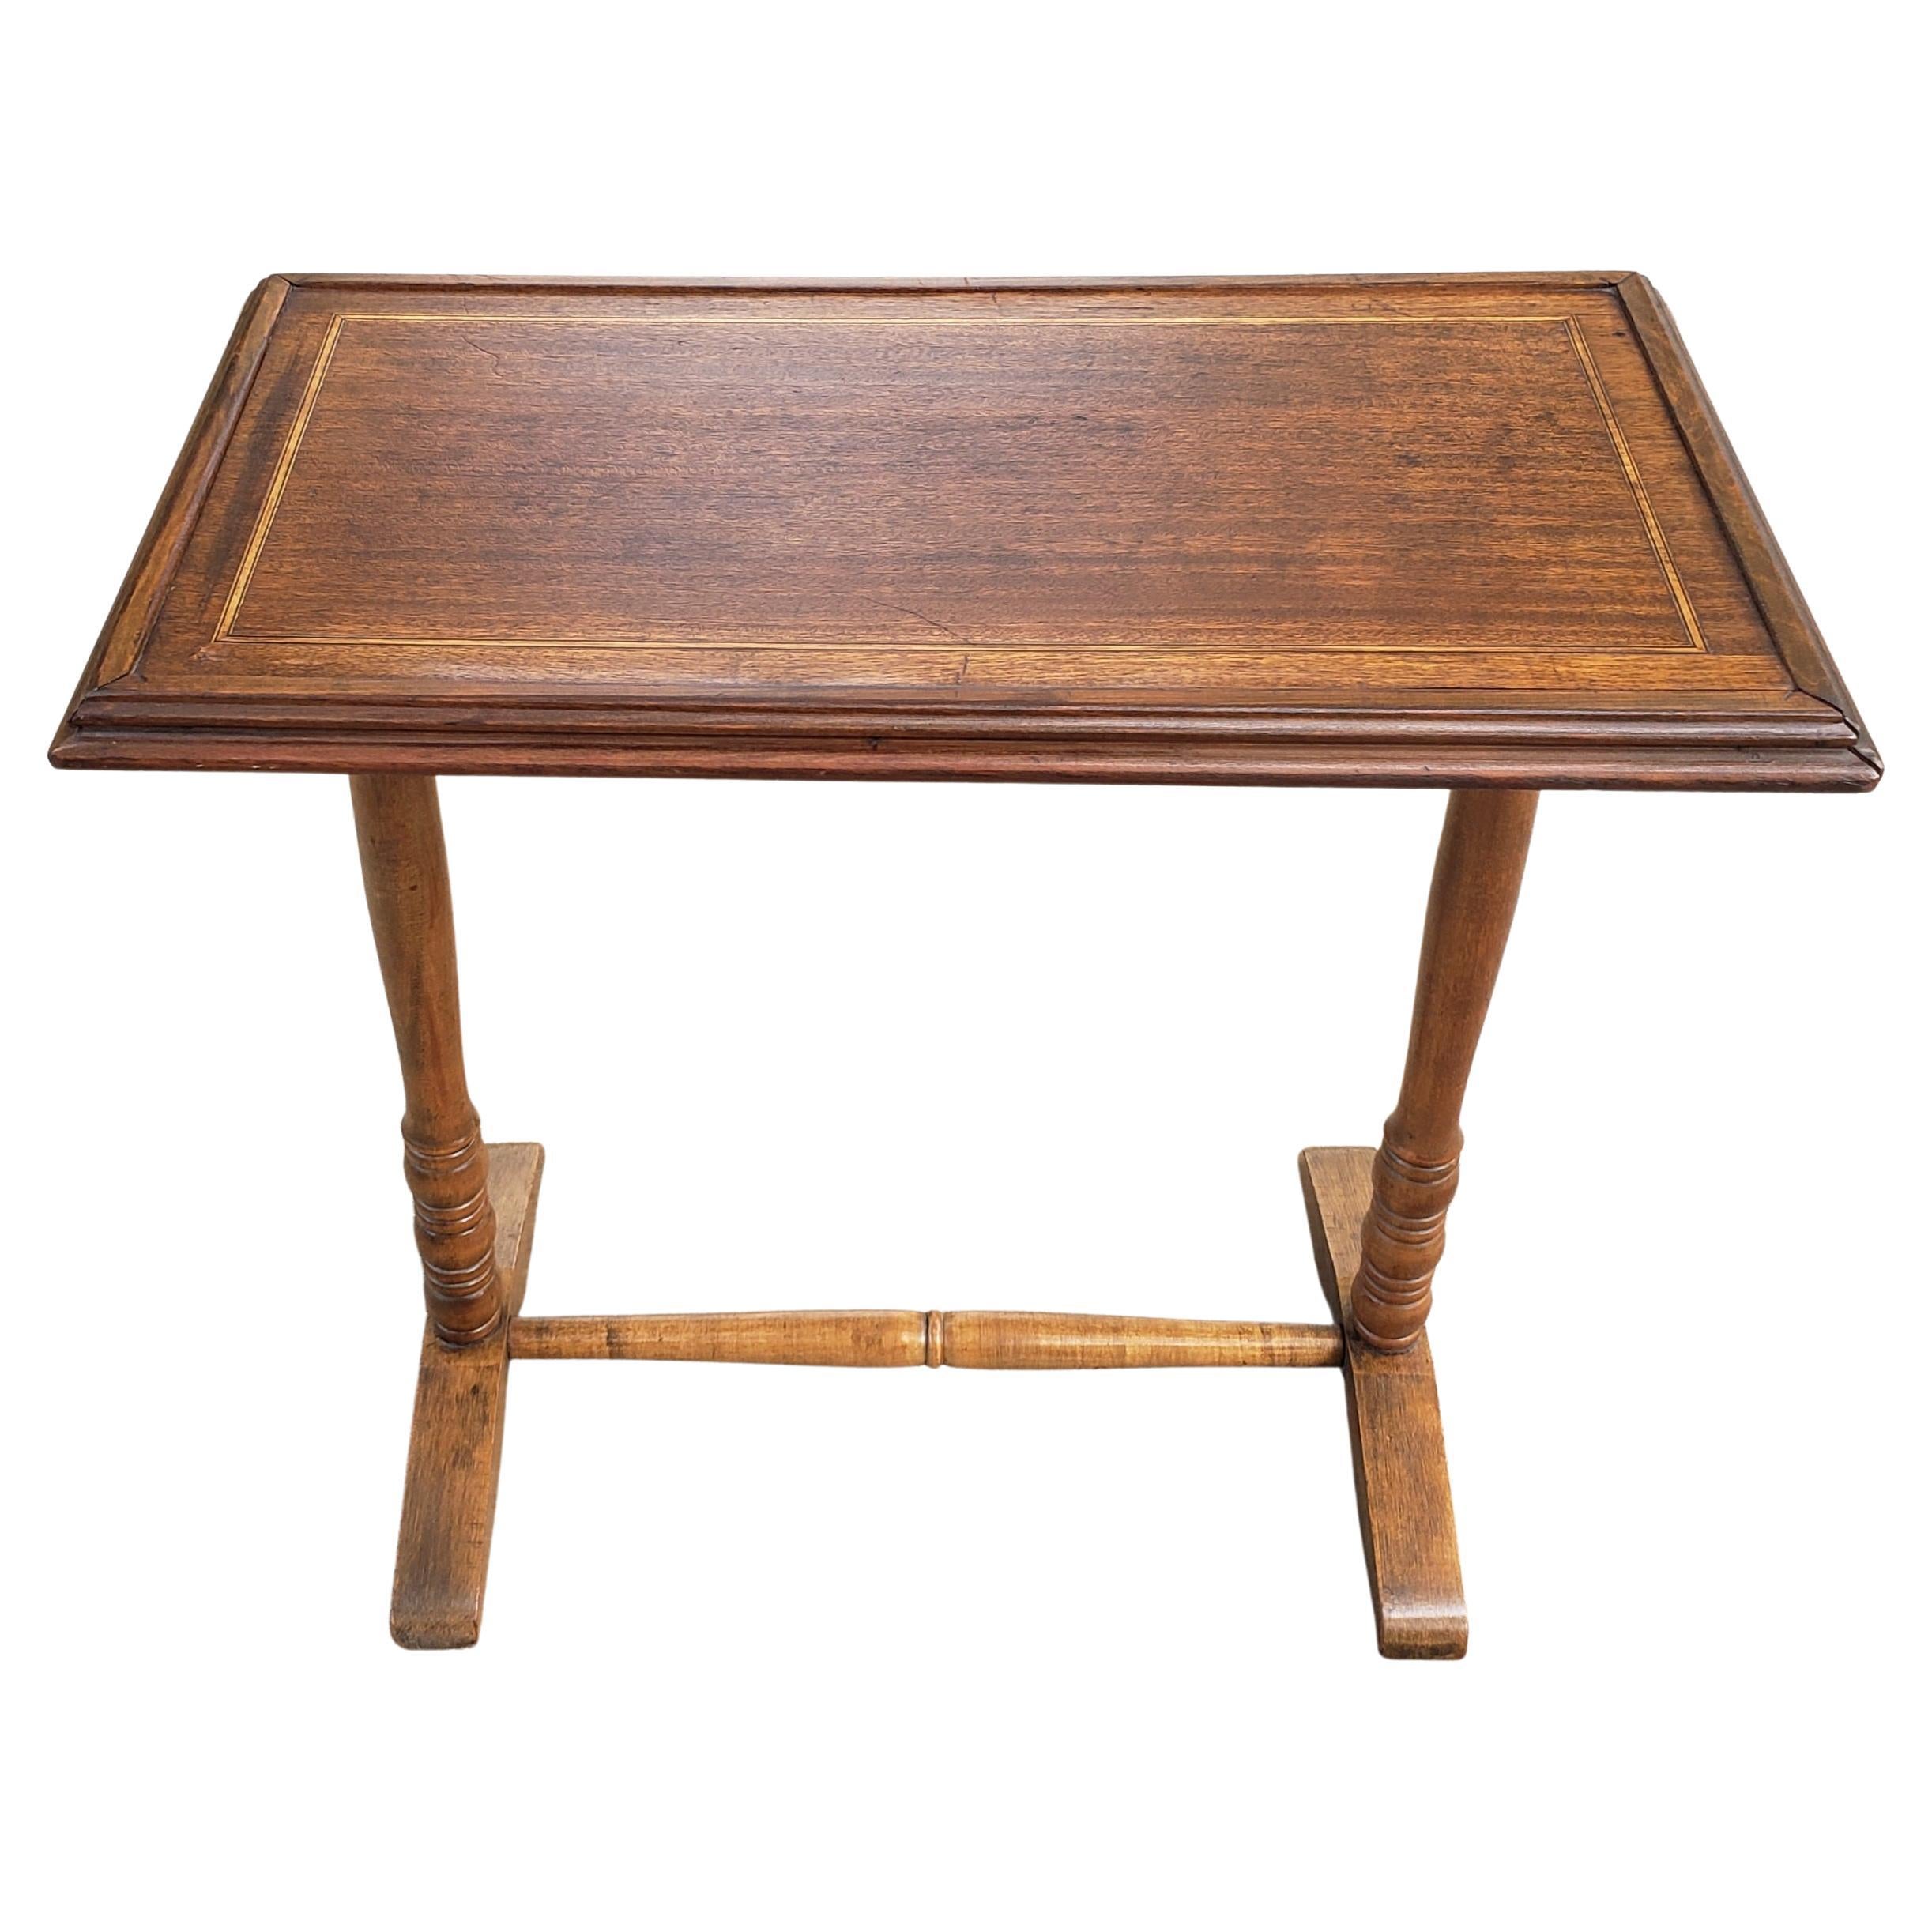 An exquisite, small mahogany top with satinwood inlays and maple legs and trestle. 
Table is sturdy and Measures 25.25